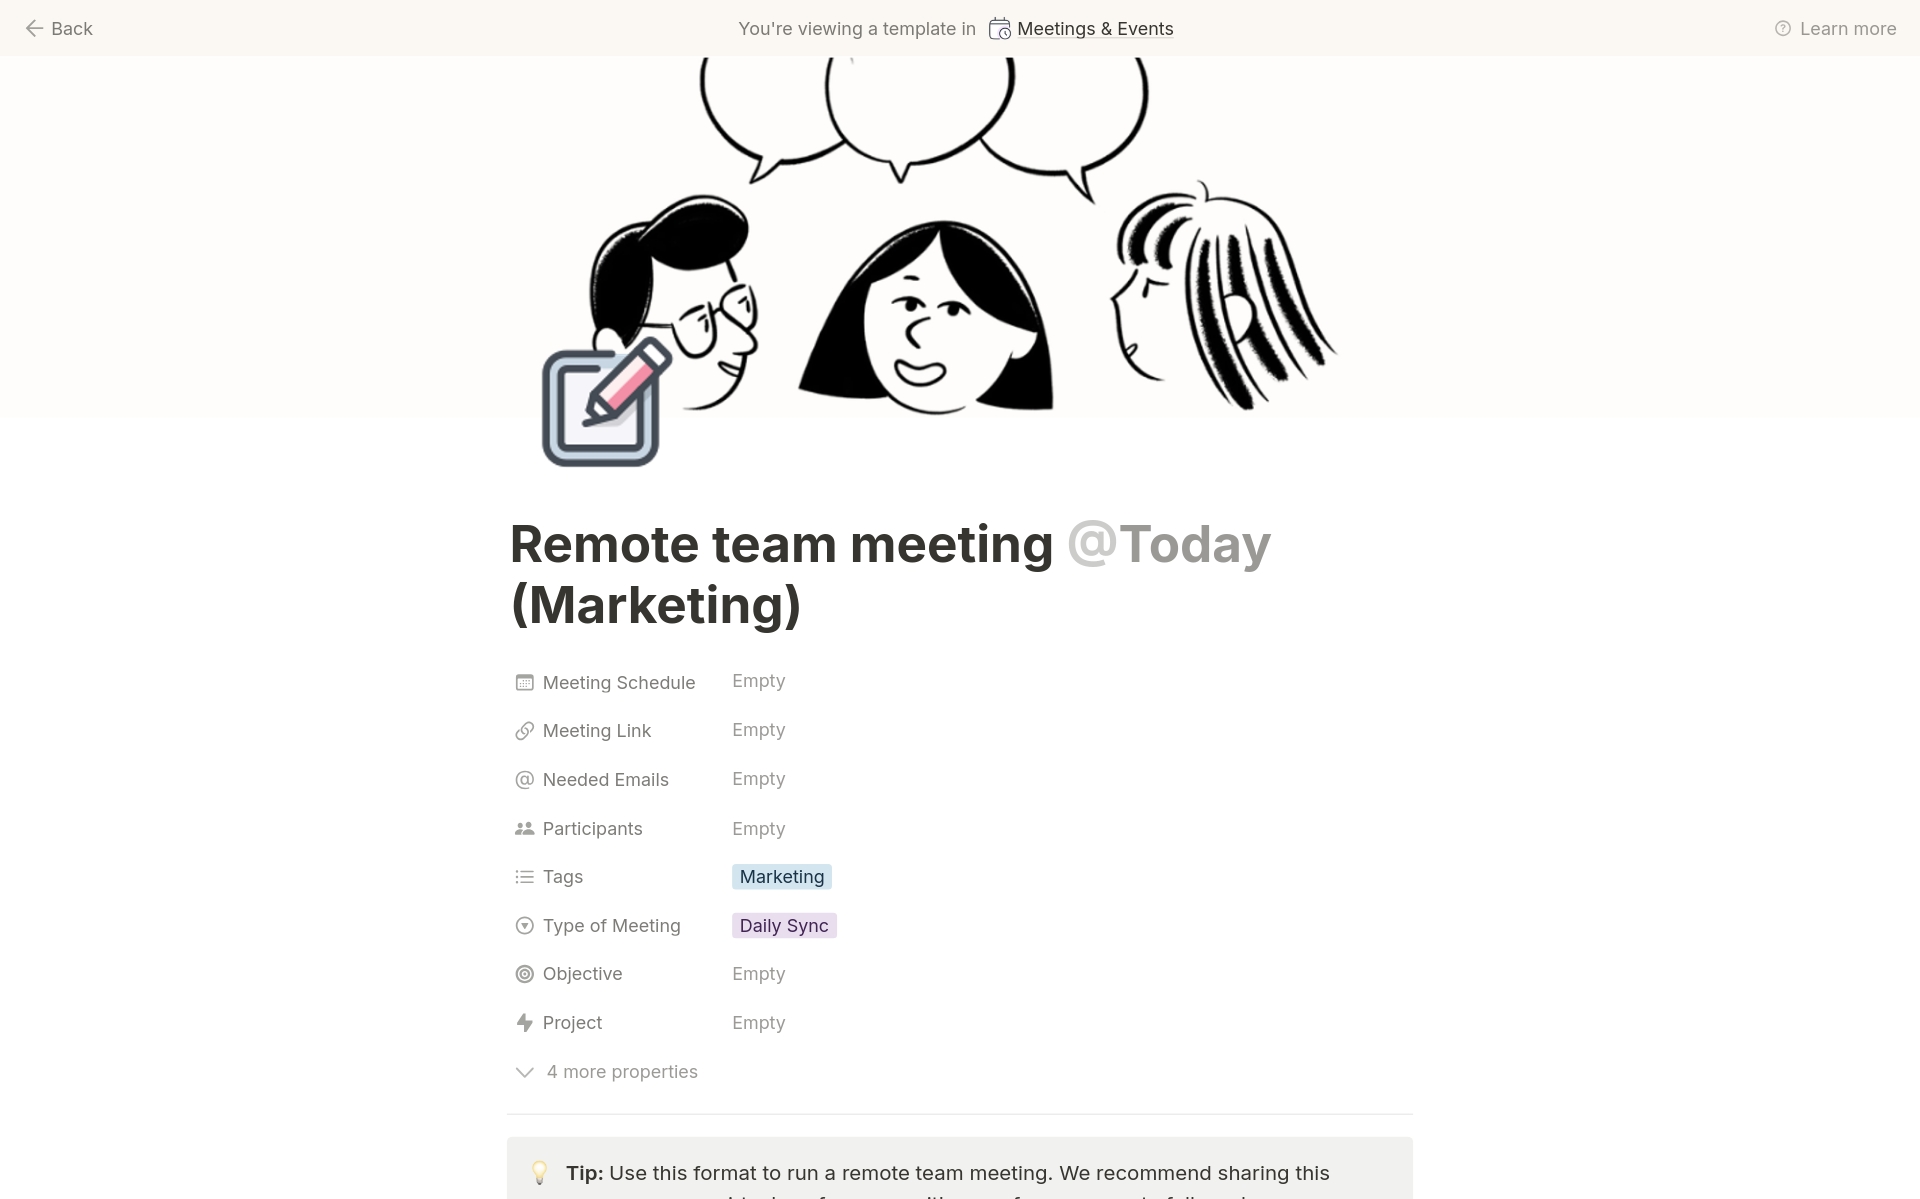 Meetings, Events & Notes template on Notion – your go-to solution for organizing all your important gatherings and jotting down key takeaways. >>>